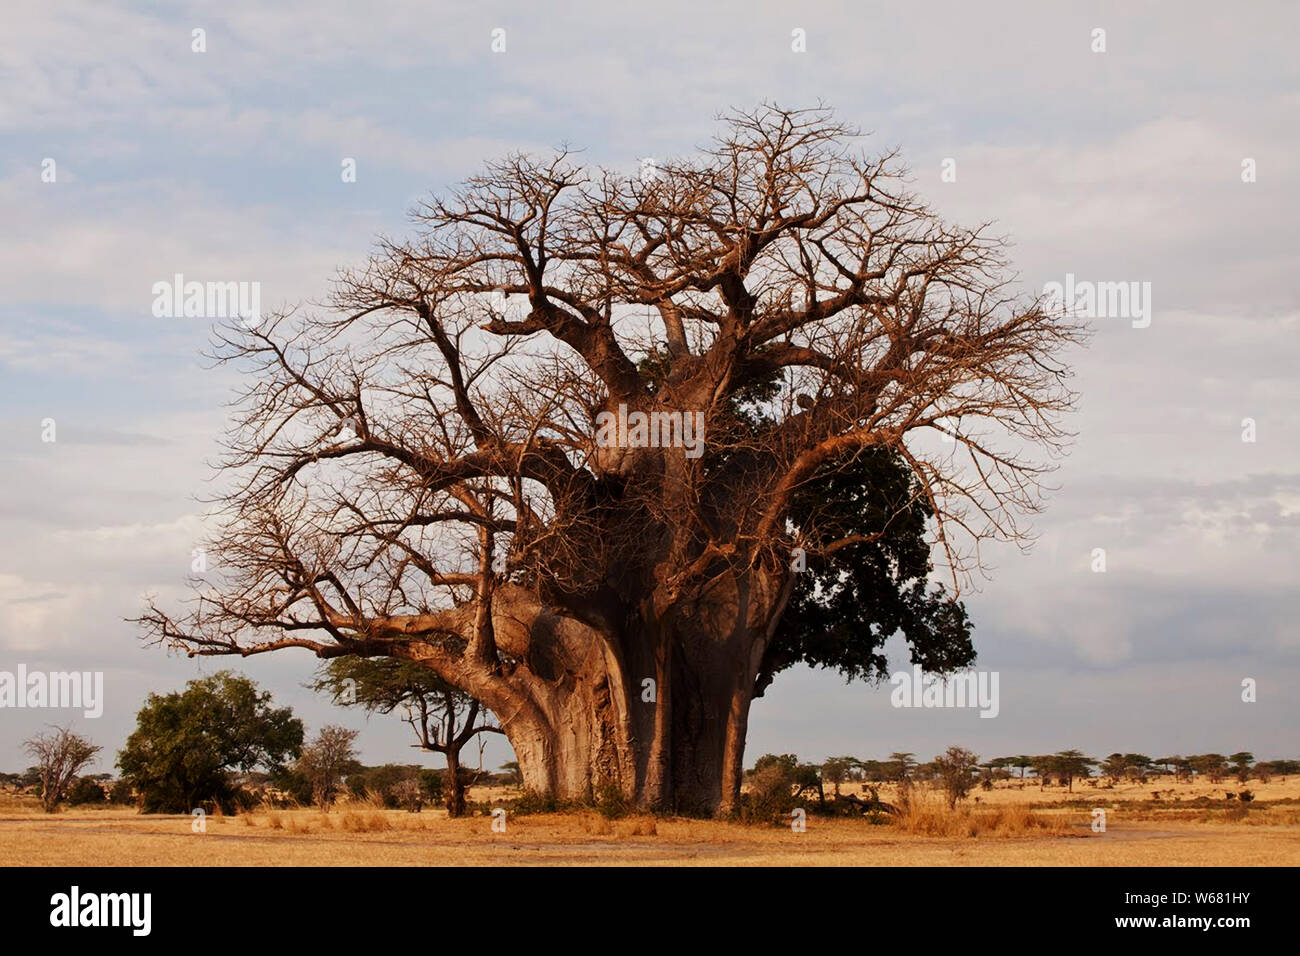 This magnificent Baobab tree is one of the largest in Tanzania and a major landmark in the Selous Game Reserve. The distinctive 'up-side-down' tree. Stock Photo